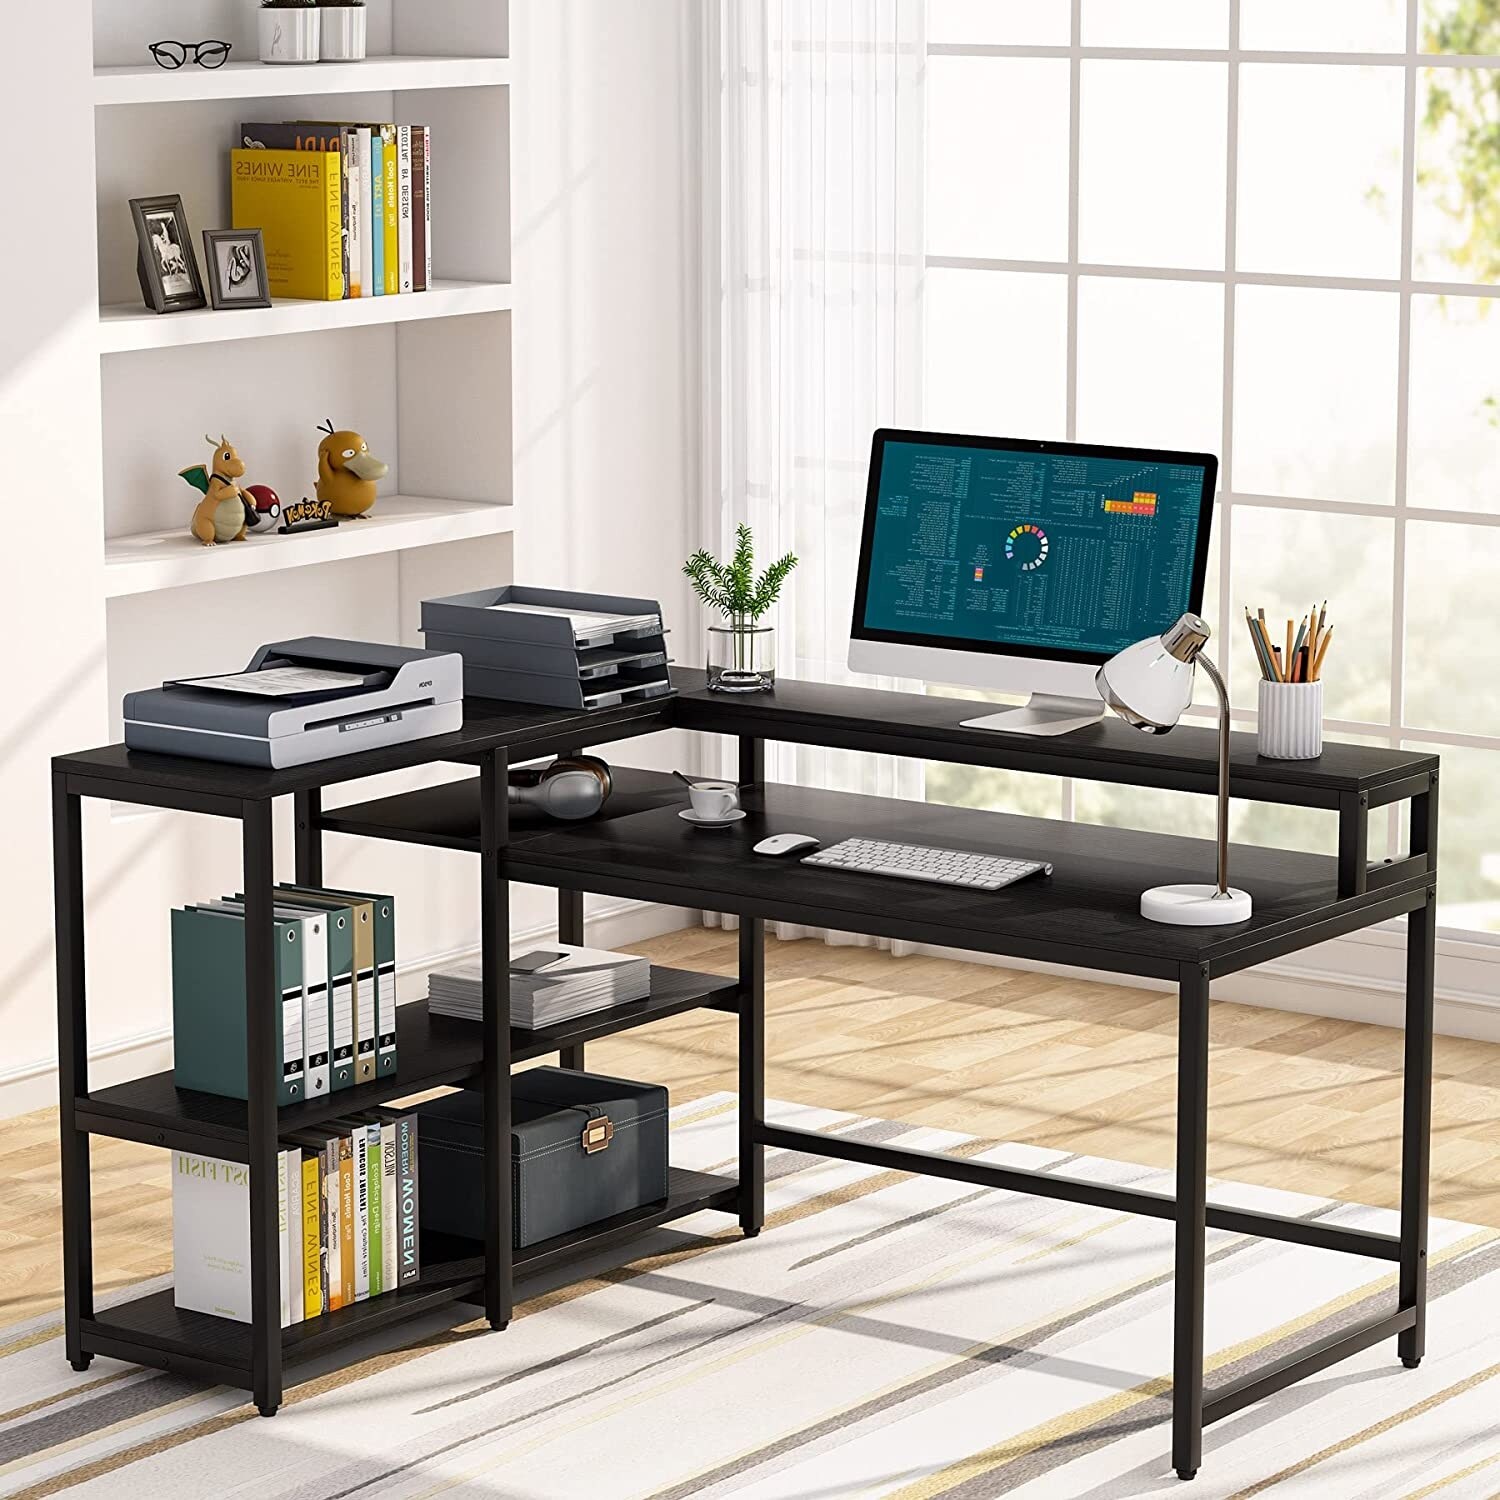 https://ak1.ostkcdn.com/images/products/is/images/direct/56deb20af5a9f22561aa6c4bc1744779d4d10414/55-Inch-Reversible-L-Shaped-Desk-with-Storage-Shelf%2C-Corner-Desk-for-Home-Office.jpg